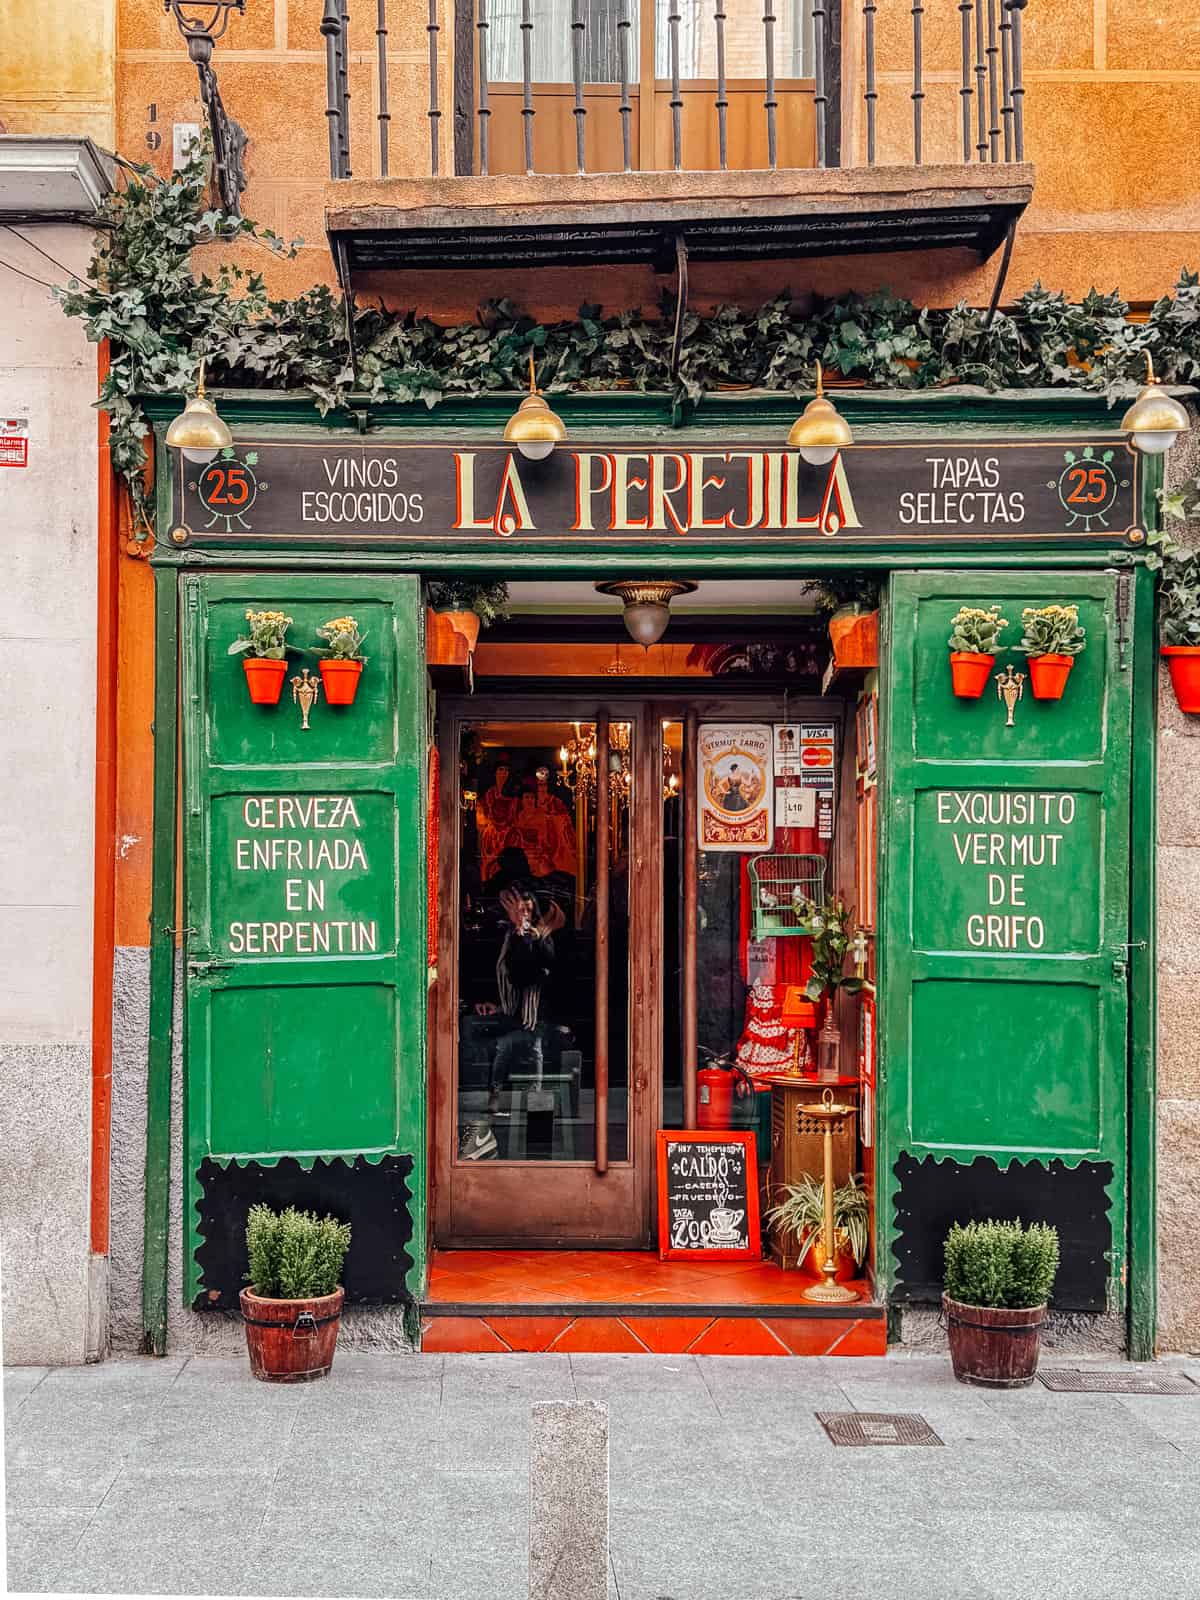 The vibrant green exterior of La Perejila bar in Madrid, adorned with flower pots and a sign advertising selected wines and tapas, invites passersby into its warm, welcoming atmosphere.